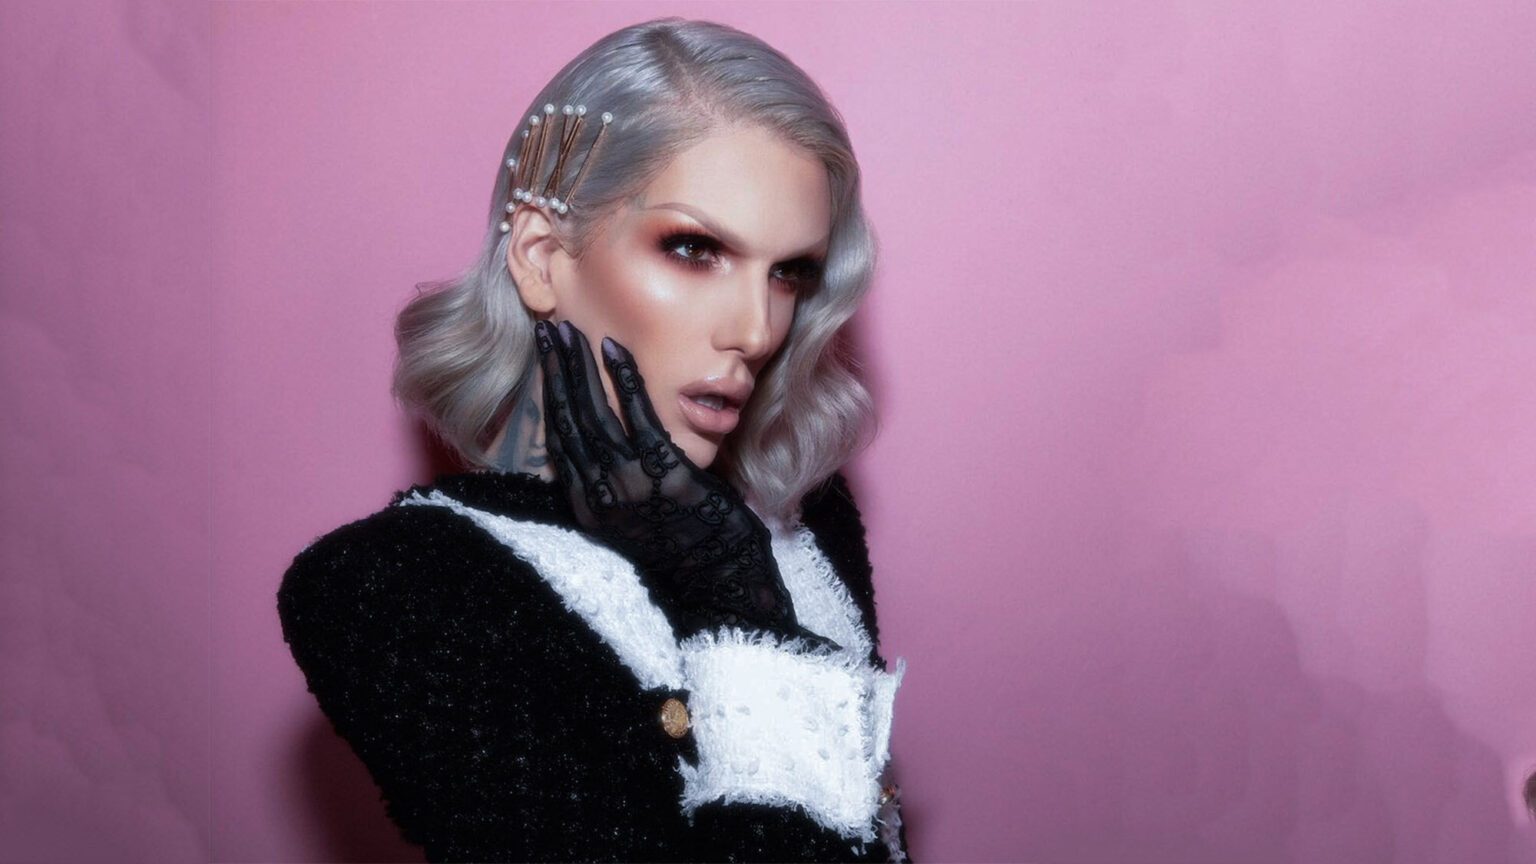 Jeffree Star is always the epicenter of drama. Here's everything to know about the recent allegations against Star on Twitter.